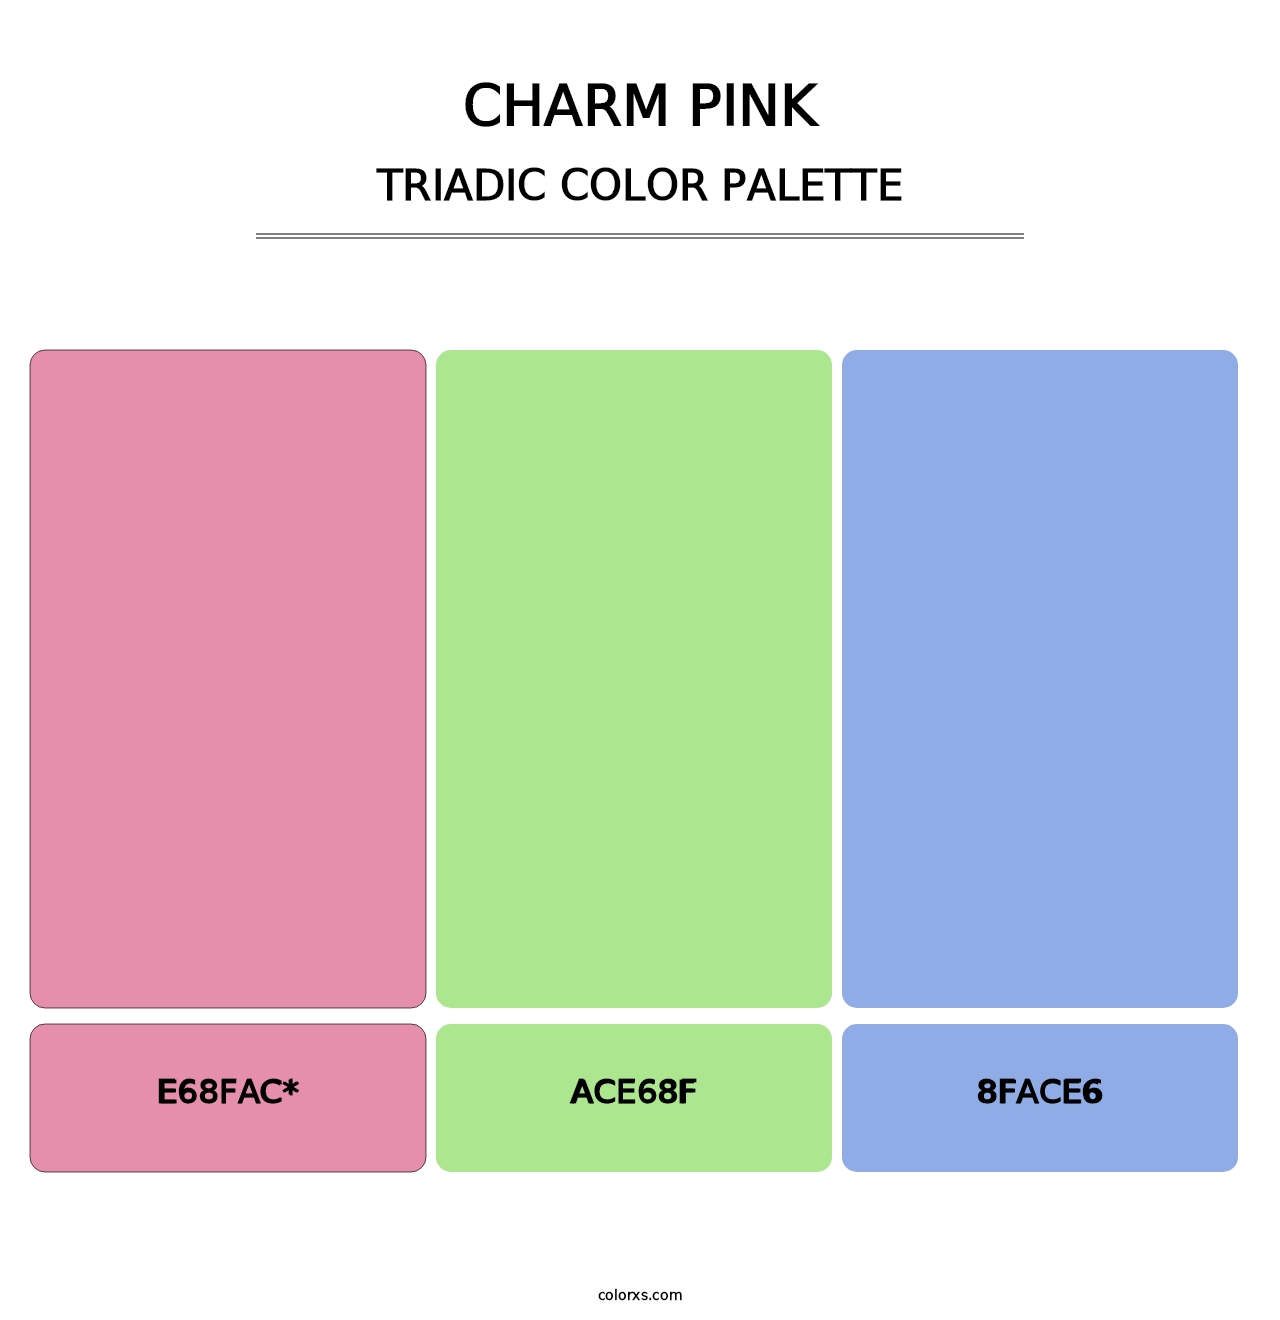 Charm Pink - Triadic Color Palette